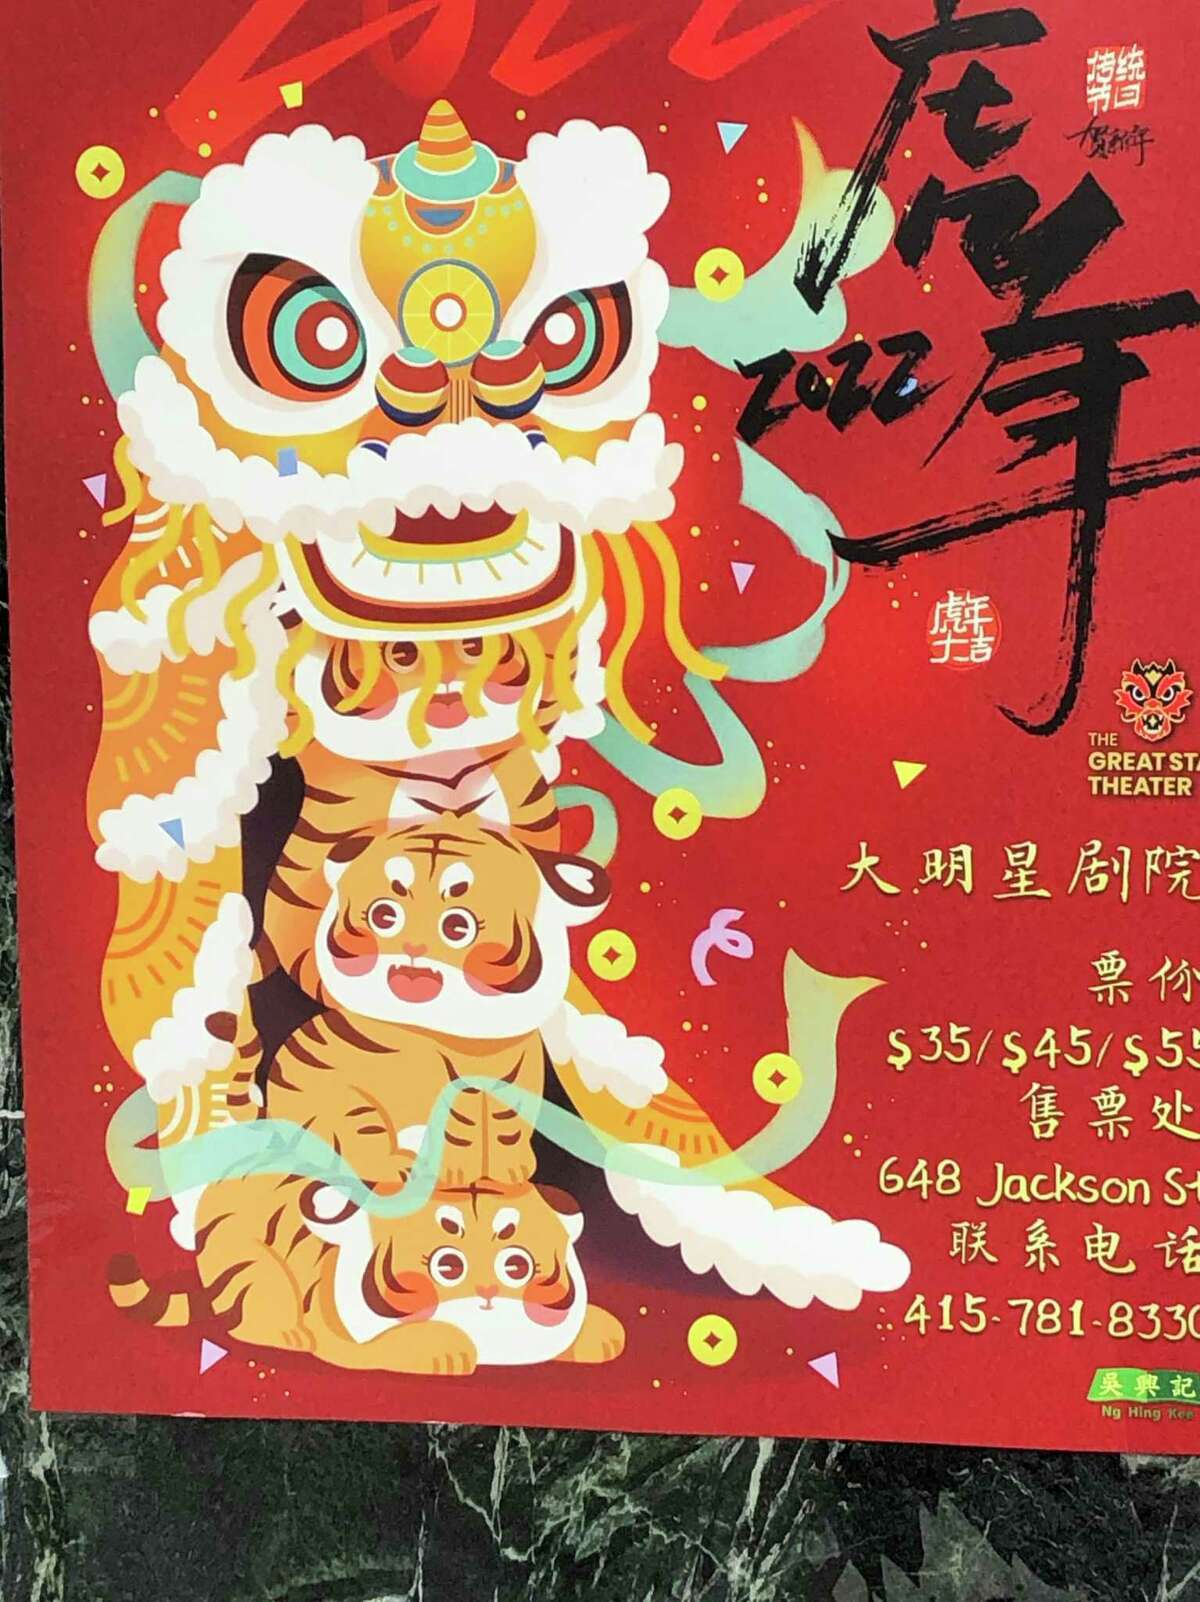 A poster in Chinatown features a Year of the Tiger design.